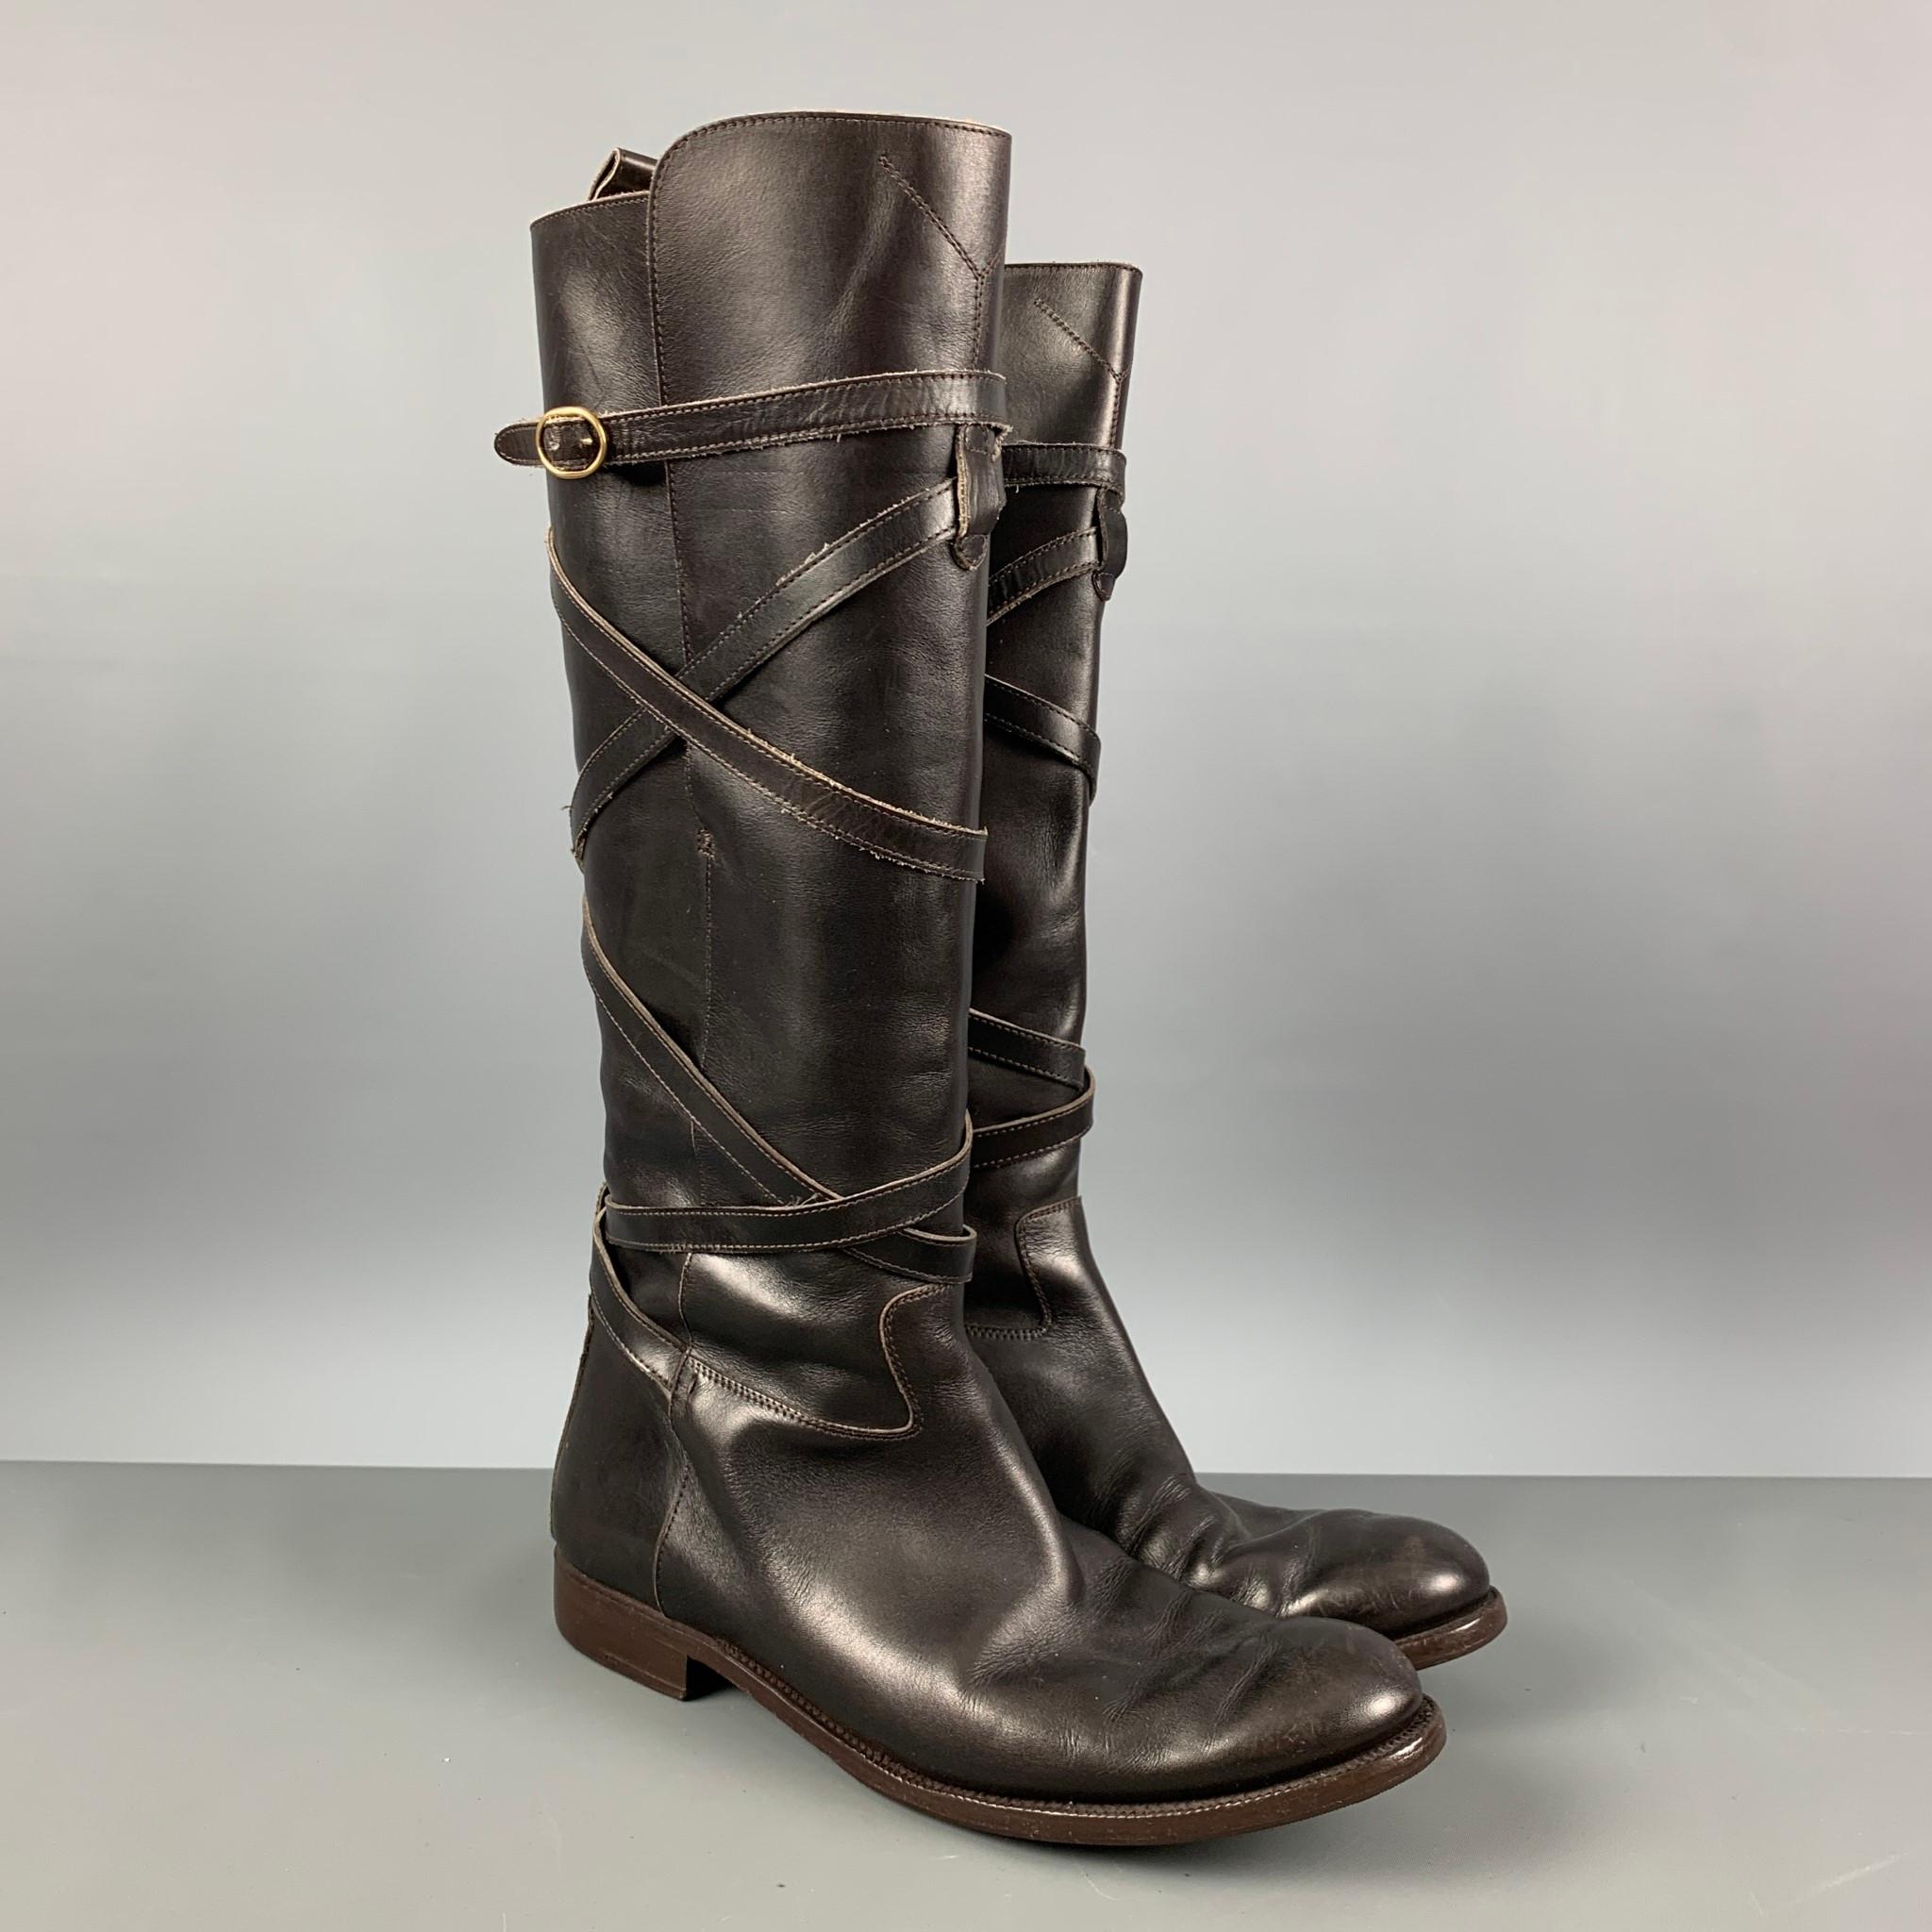 YVES SAINT LAURENT boots comes in a brown leather featuring a round toe, knee high, and a wrap around leather strap style. Made in Italy.

Very Good Pre-Owned Condition. Minor wear.
Marked: 182527 41

Measurements:

Length: 12 in.
Width: 3.75